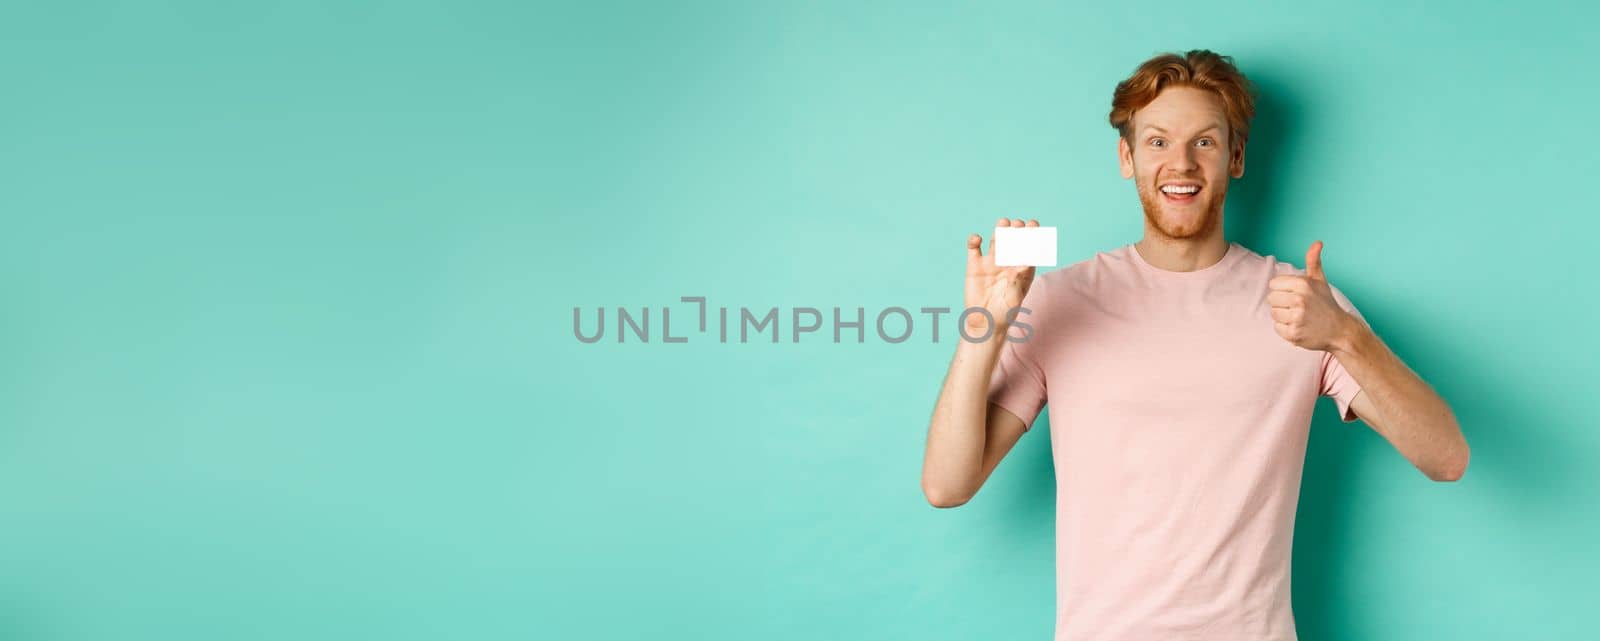 Cheerful male bank client in t-shirt showing thumb up and plastic credit card, smiling satisfied at camera, standing over turquoise background.